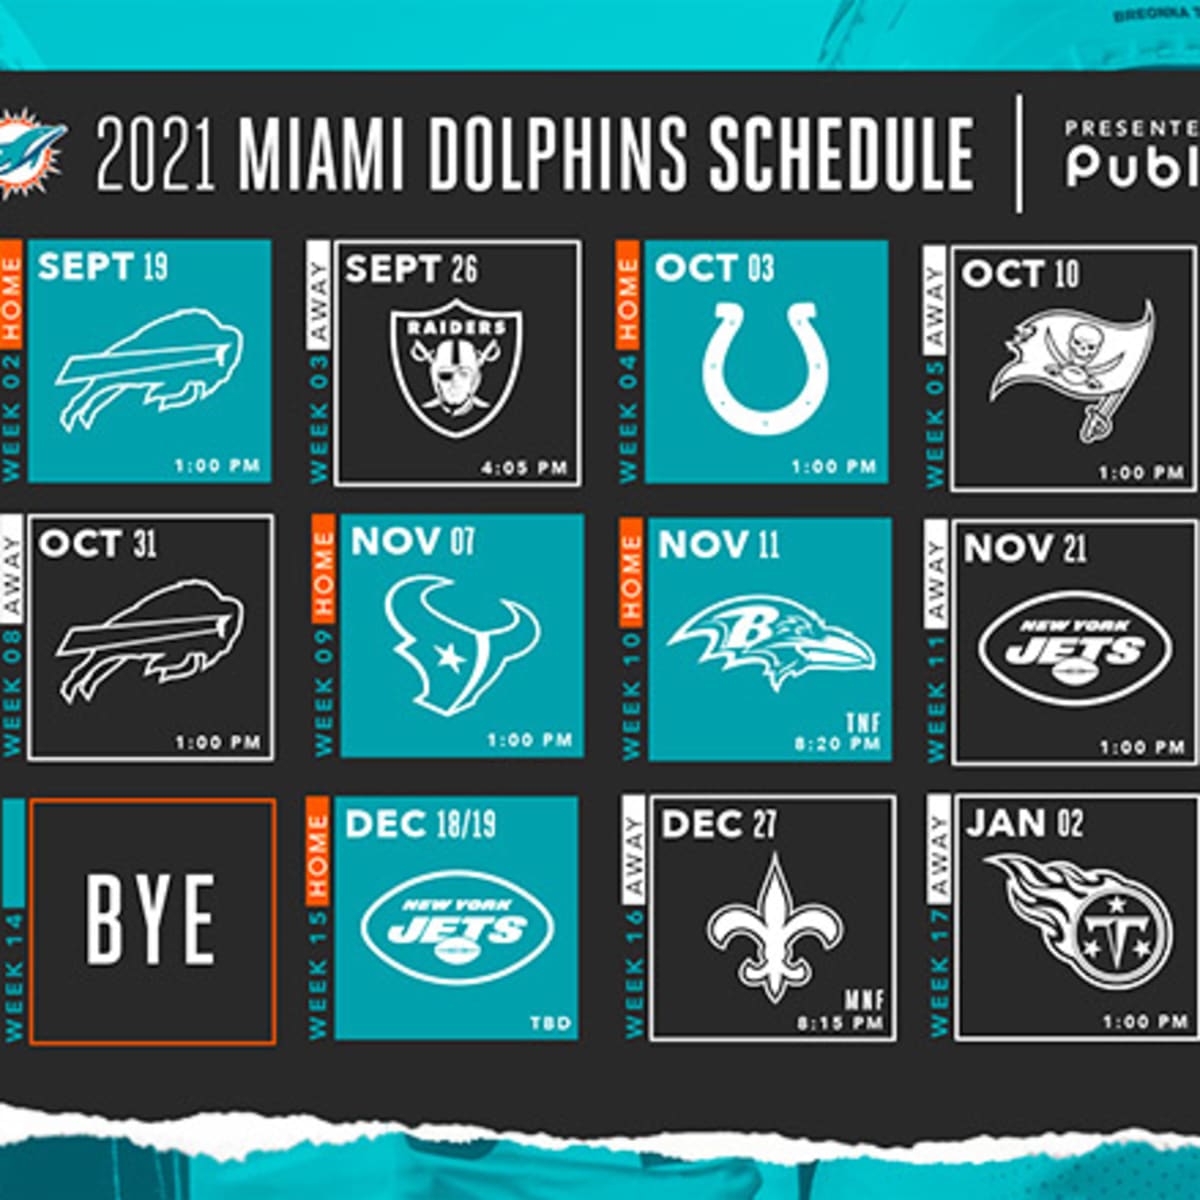 Miami Dolphins 2022 Schedule Miami Dolphins Schedule 2021 - Athlonsports.com | Expert Predictions,  Picks, And Previews